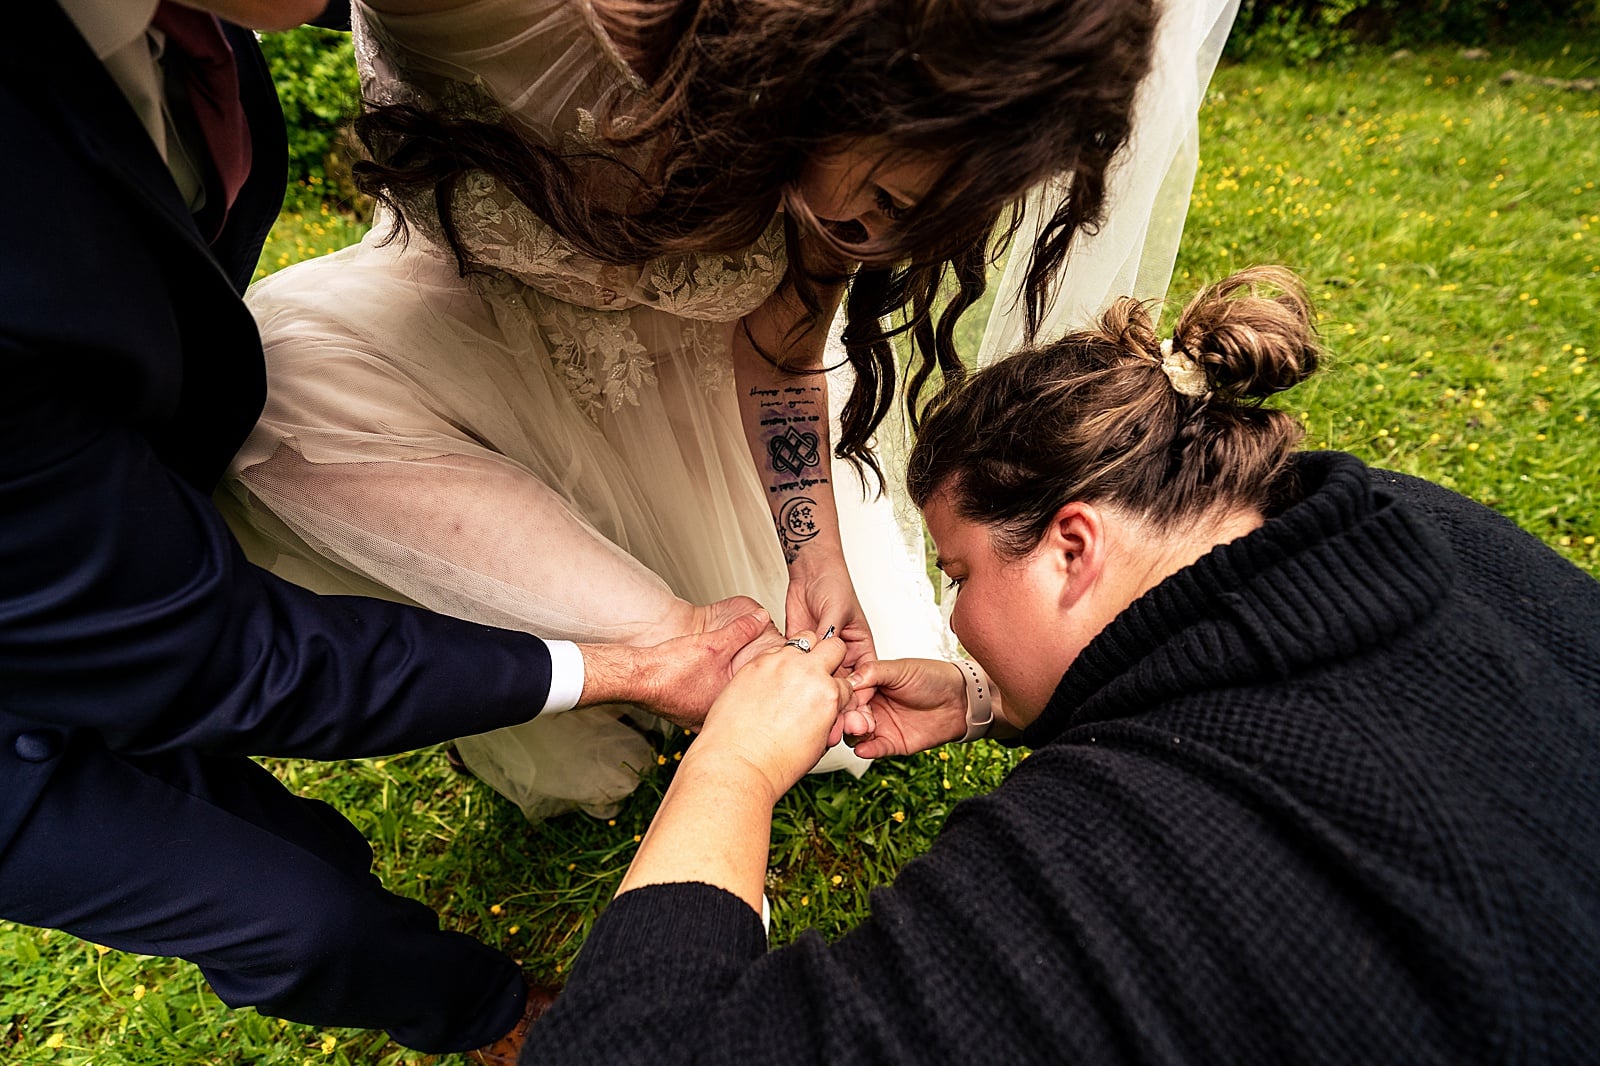 This bride got a splinter, but her partner and wedding planner were on hand to save her poor foot!!